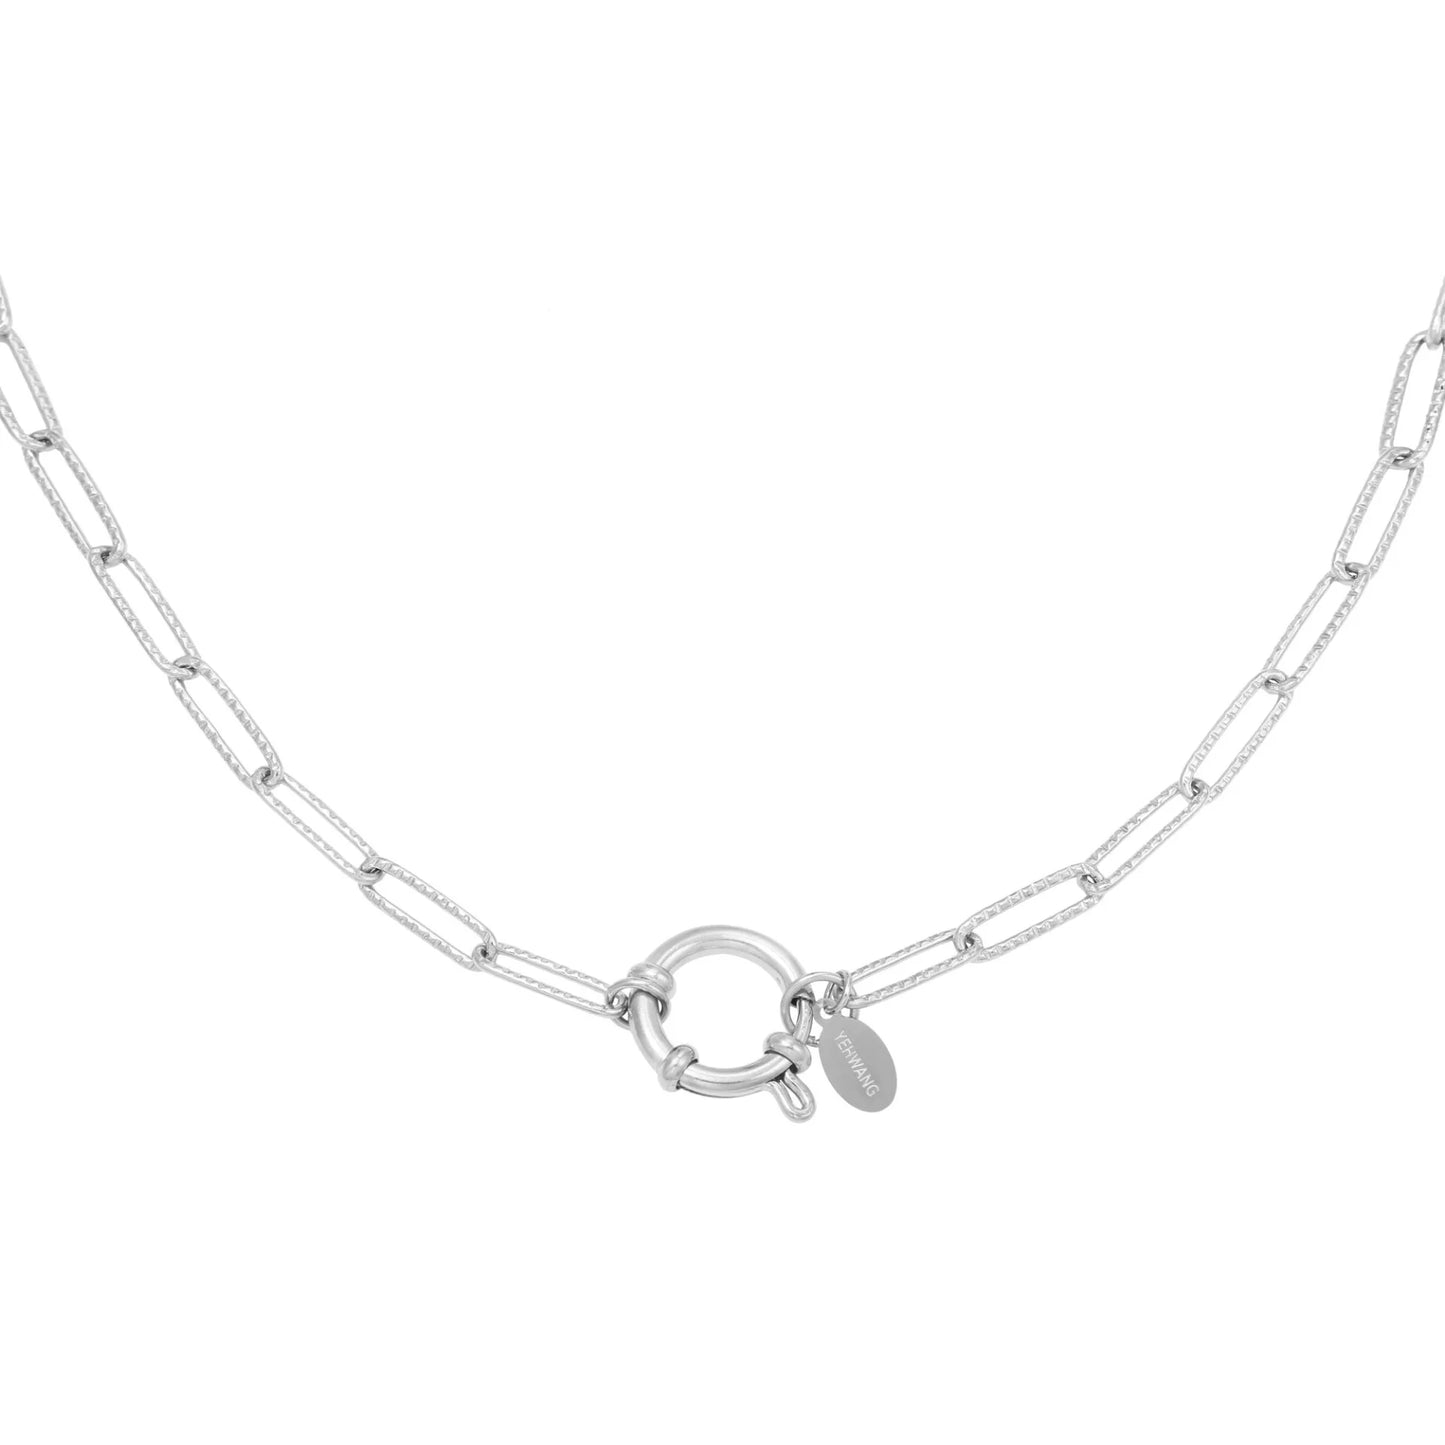 Chain ketting 2.0 zilver